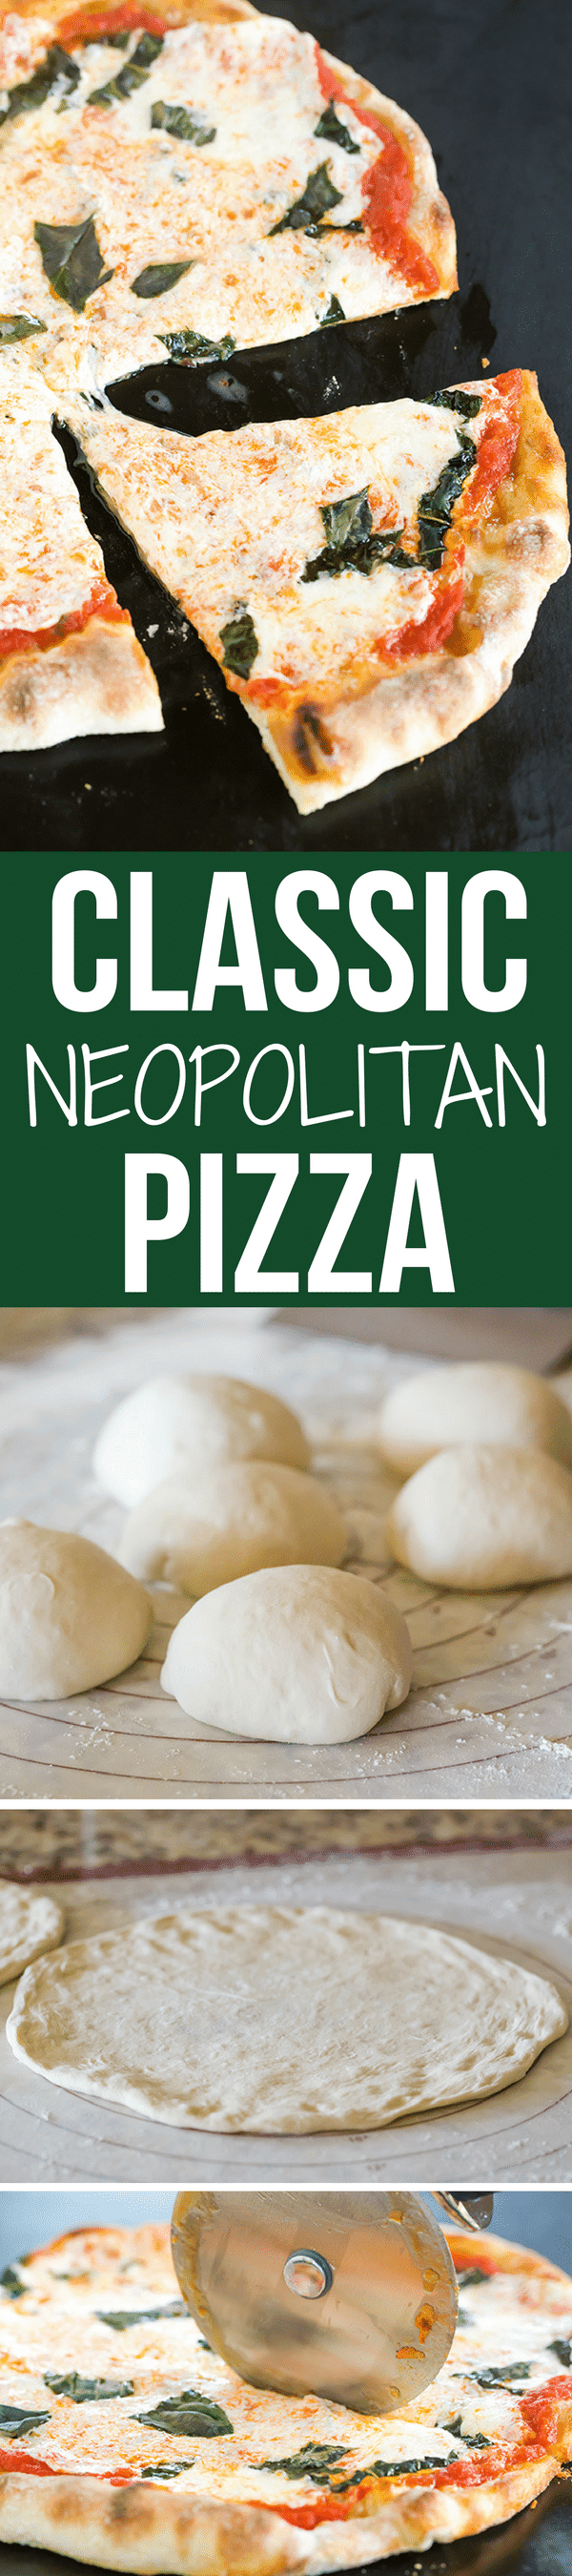 This Neapolitan pizza crust is thin, crispy and has the most amazing flavor. My homemade pizza-making is forever changed!